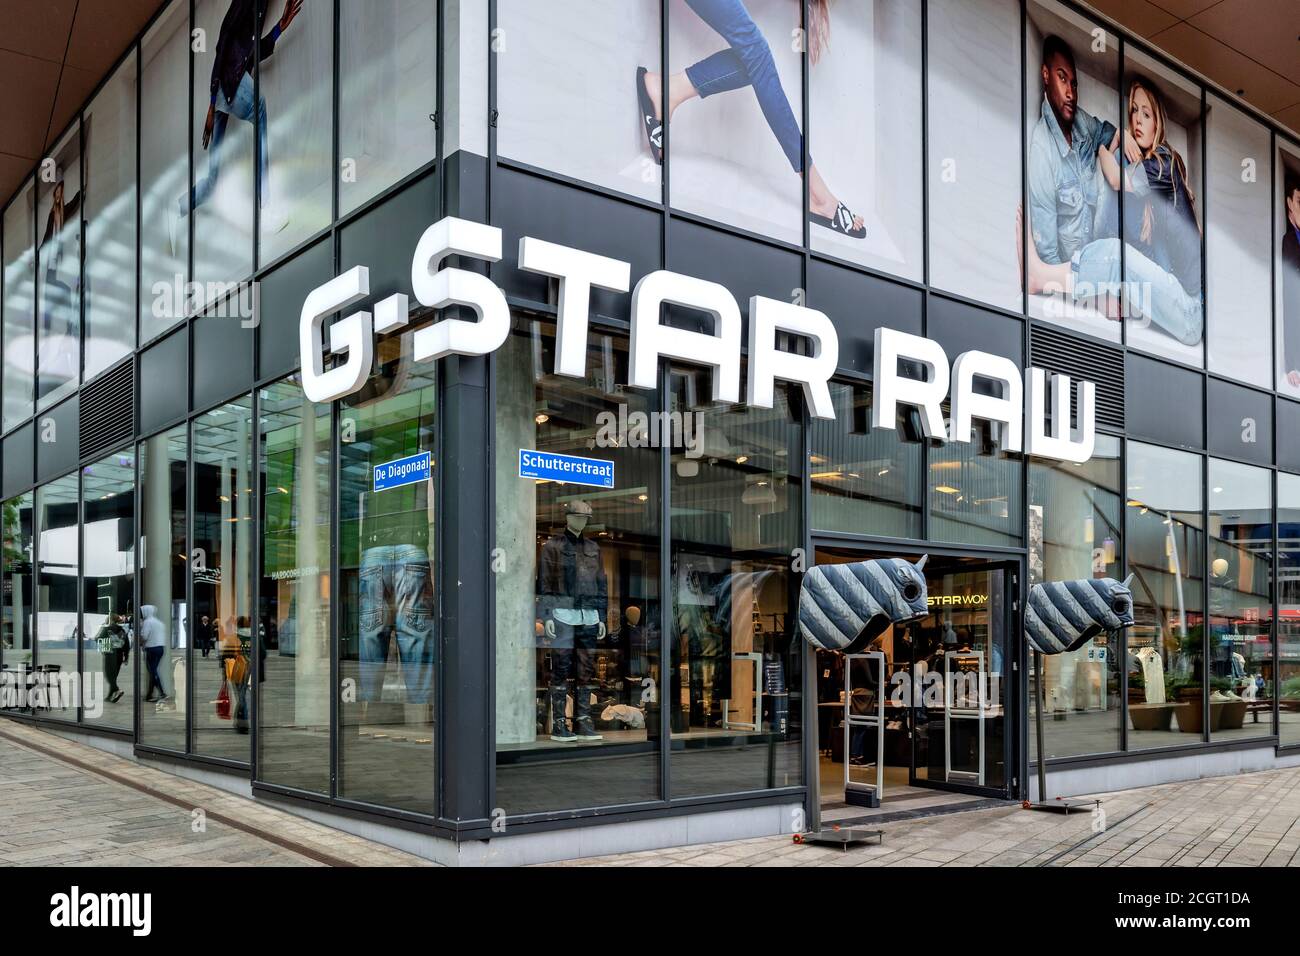 G Star Raw Logo Shop Brand High Resolution Stock Photography and Images -  Alamy